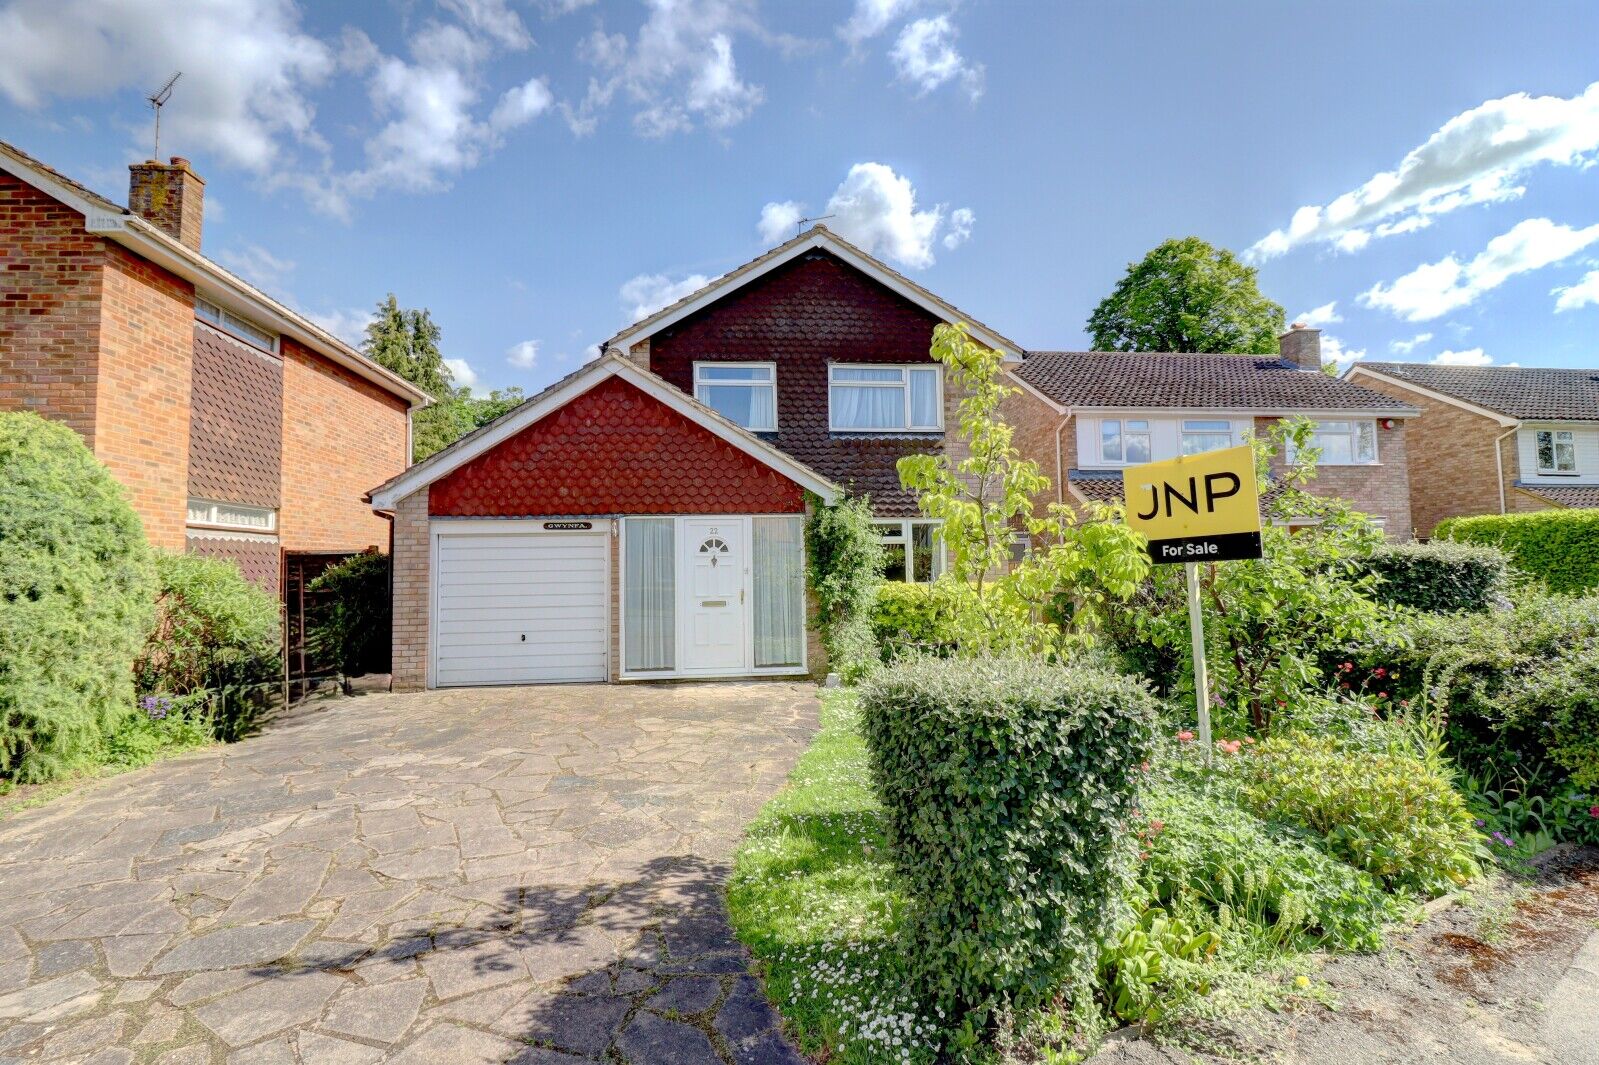 3 bedroom detached house for sale Stratton Road, Princes Risborough, HP27, main image